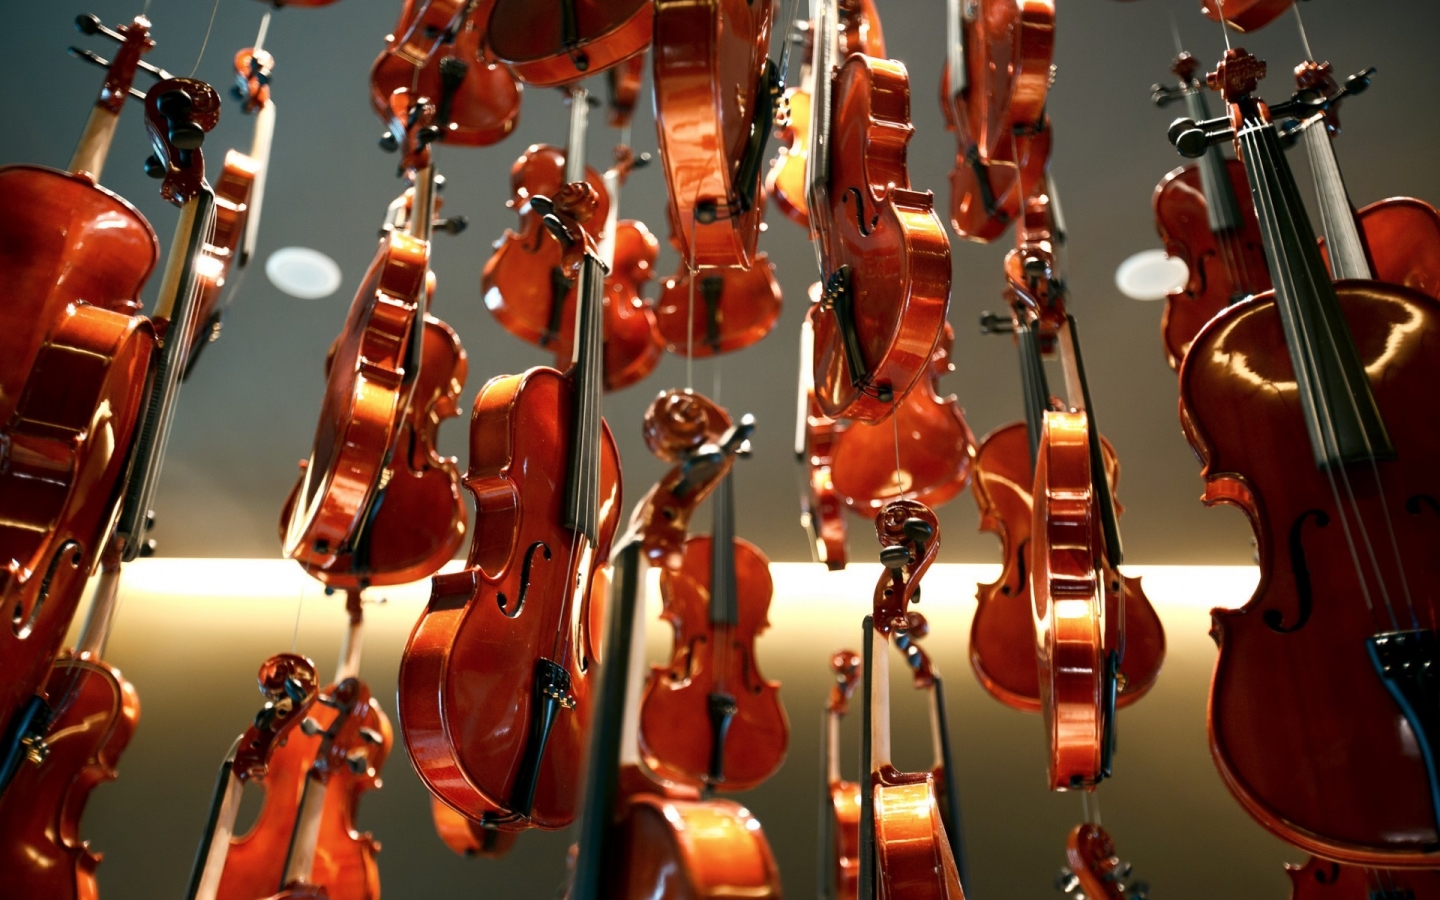 New Violins for 1440 x 900 widescreen resolution